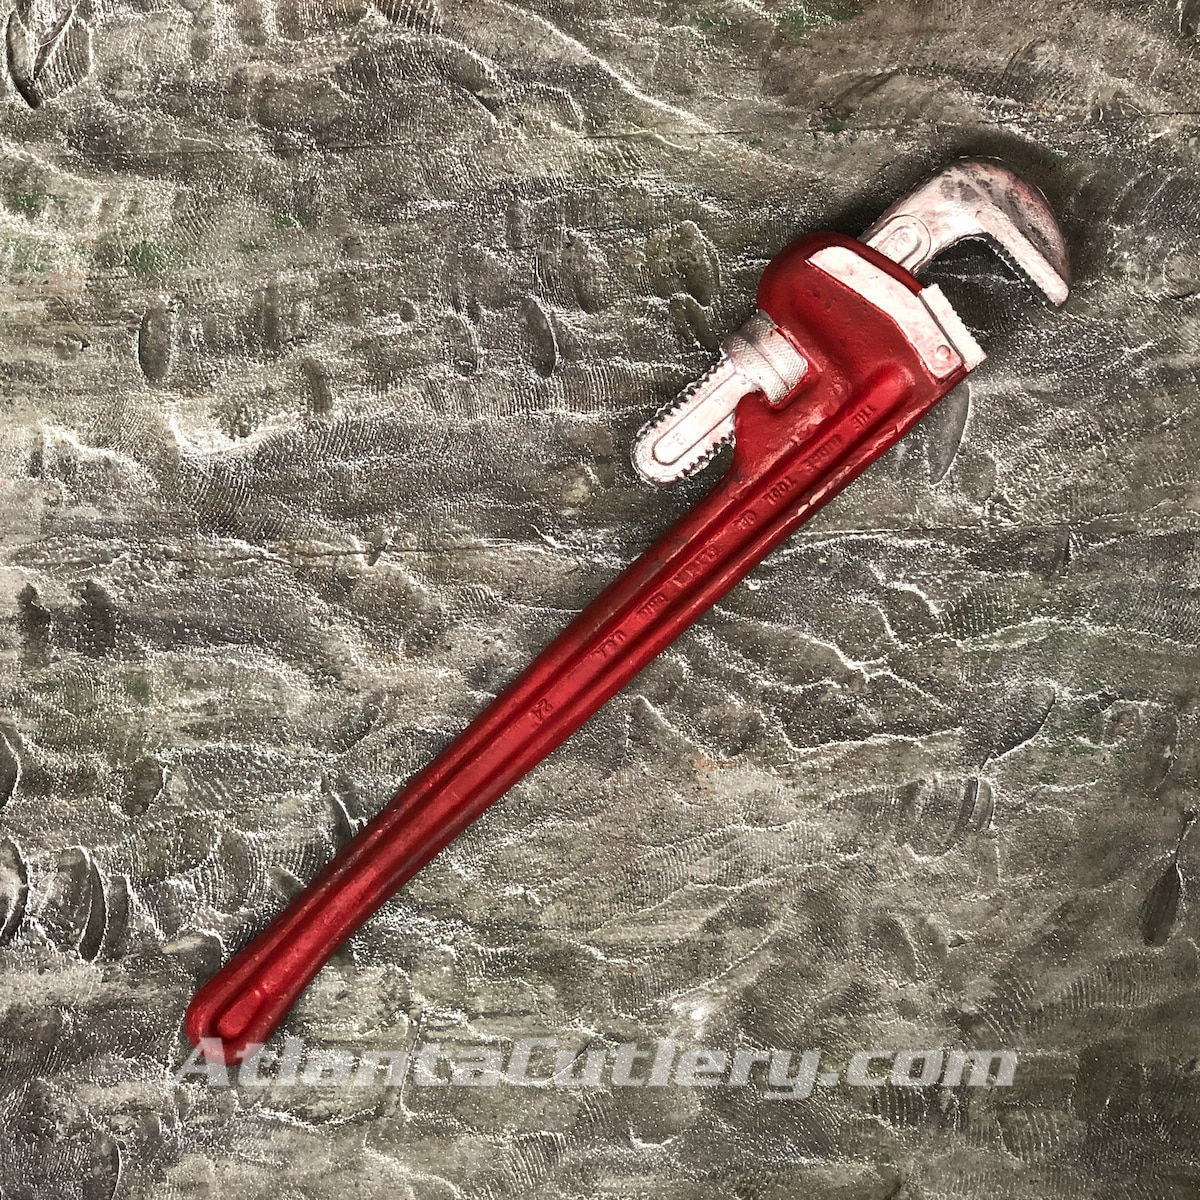 Foam Bloody Pipe Wrench is lightweight, dense foam rubber, realistically painted, and will withstand up to 80 lbs. of pressure